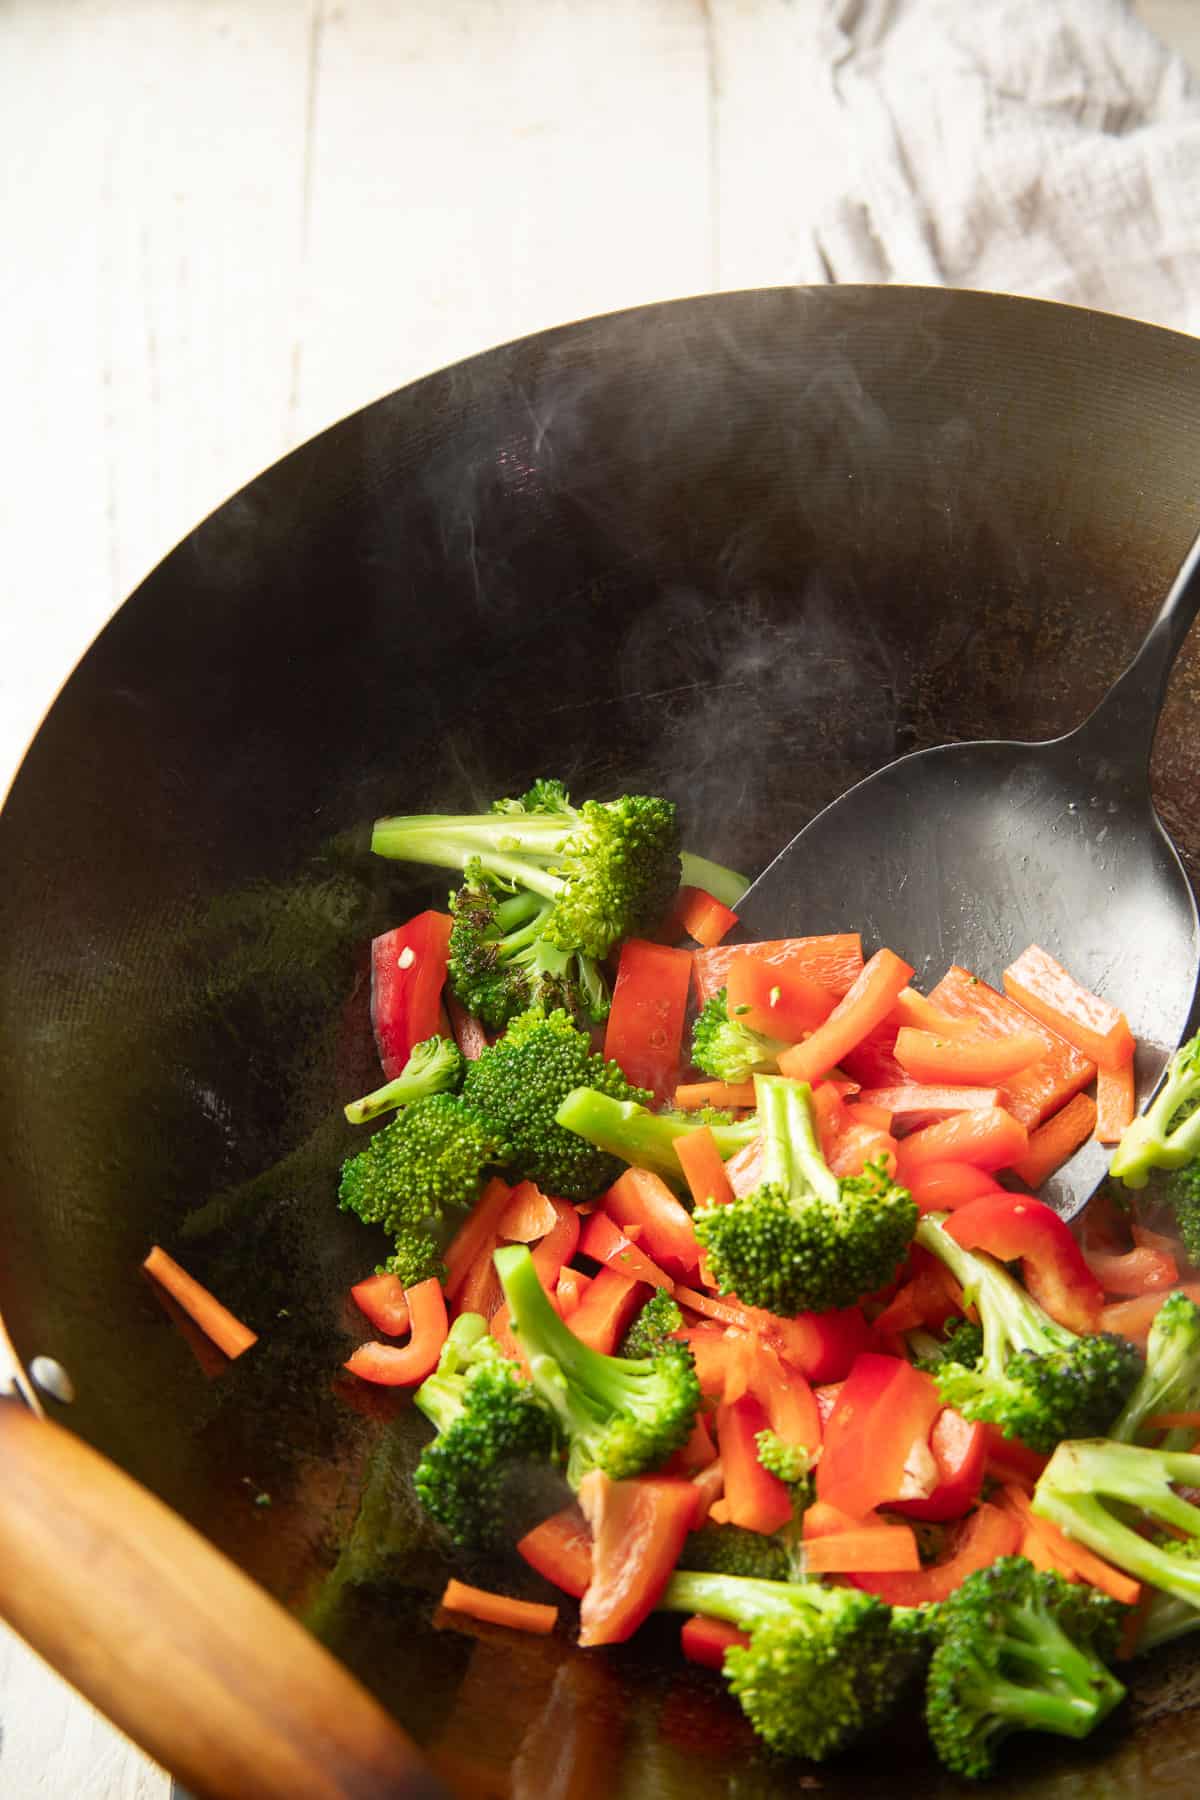 Broccoli, carrots and peppers stir-frying in a wok.